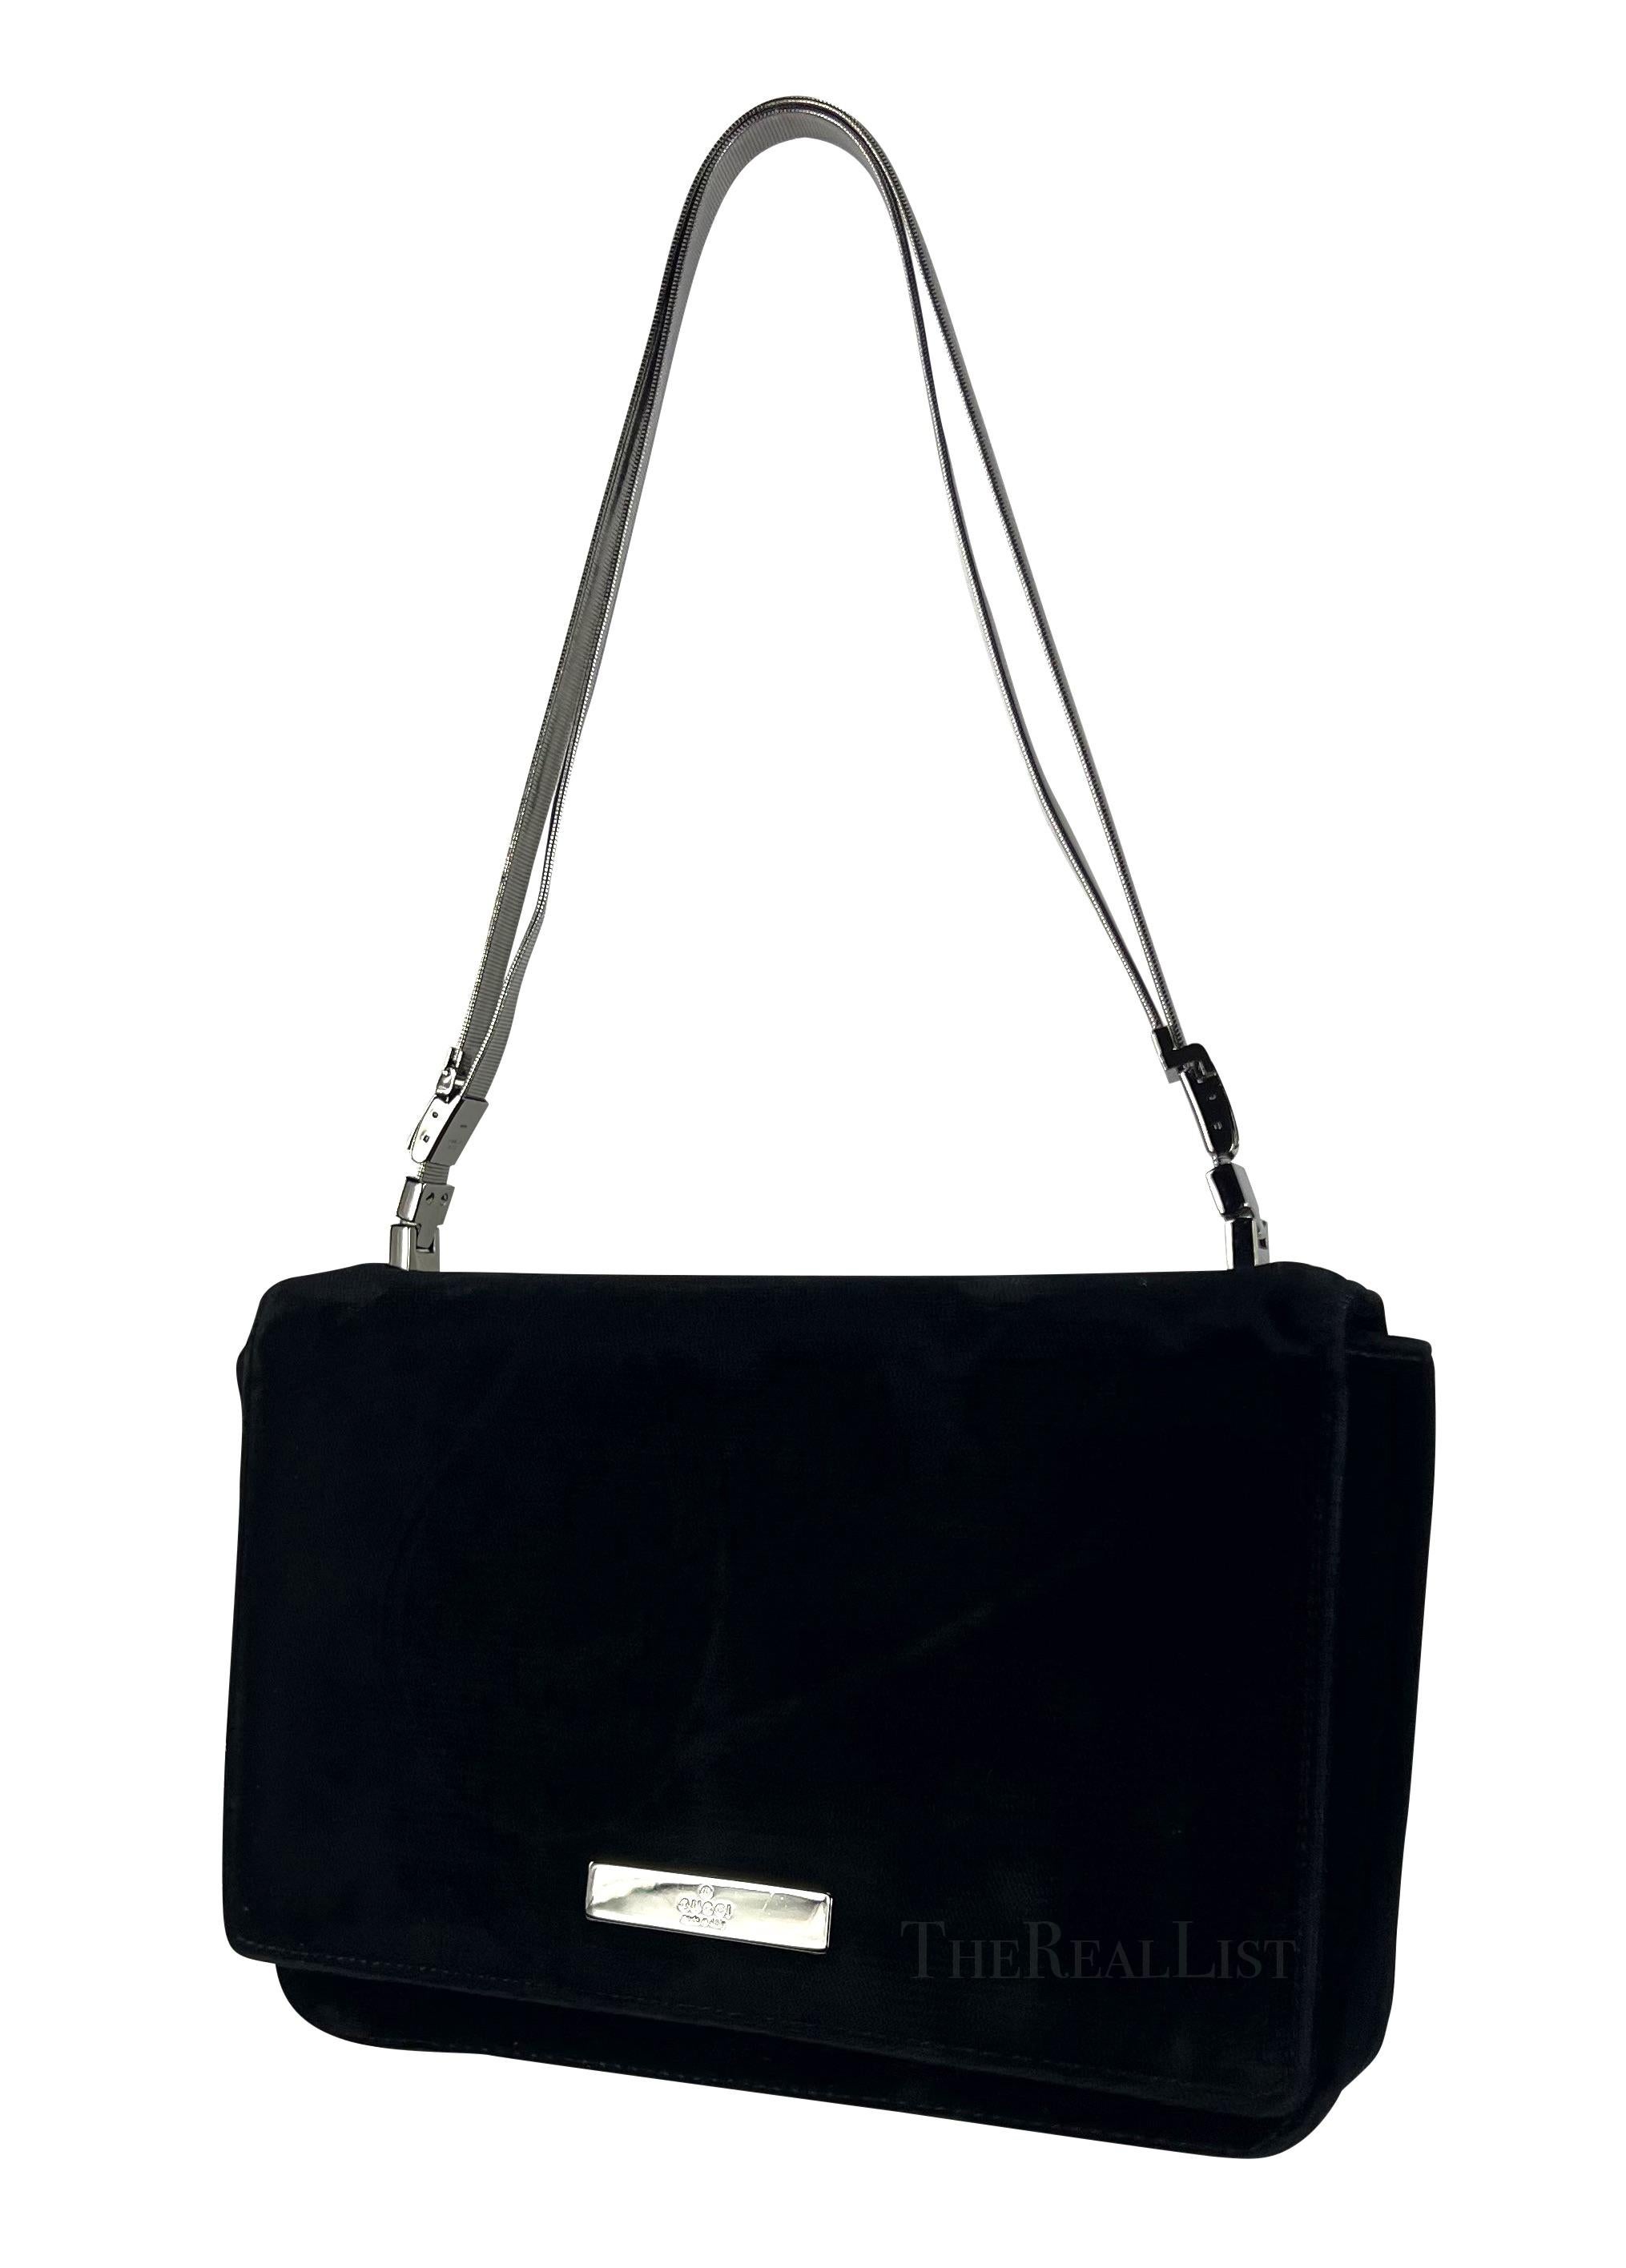 Presenting a fabulous black velvet Gucci mini bag, designed by Tom Ford. From the early 2000s, this flap bag epitomizes effortless elegance. Impeccably crafted from sumptuous black velvet, it radiates a sense of timeless glamour. The silver-tone